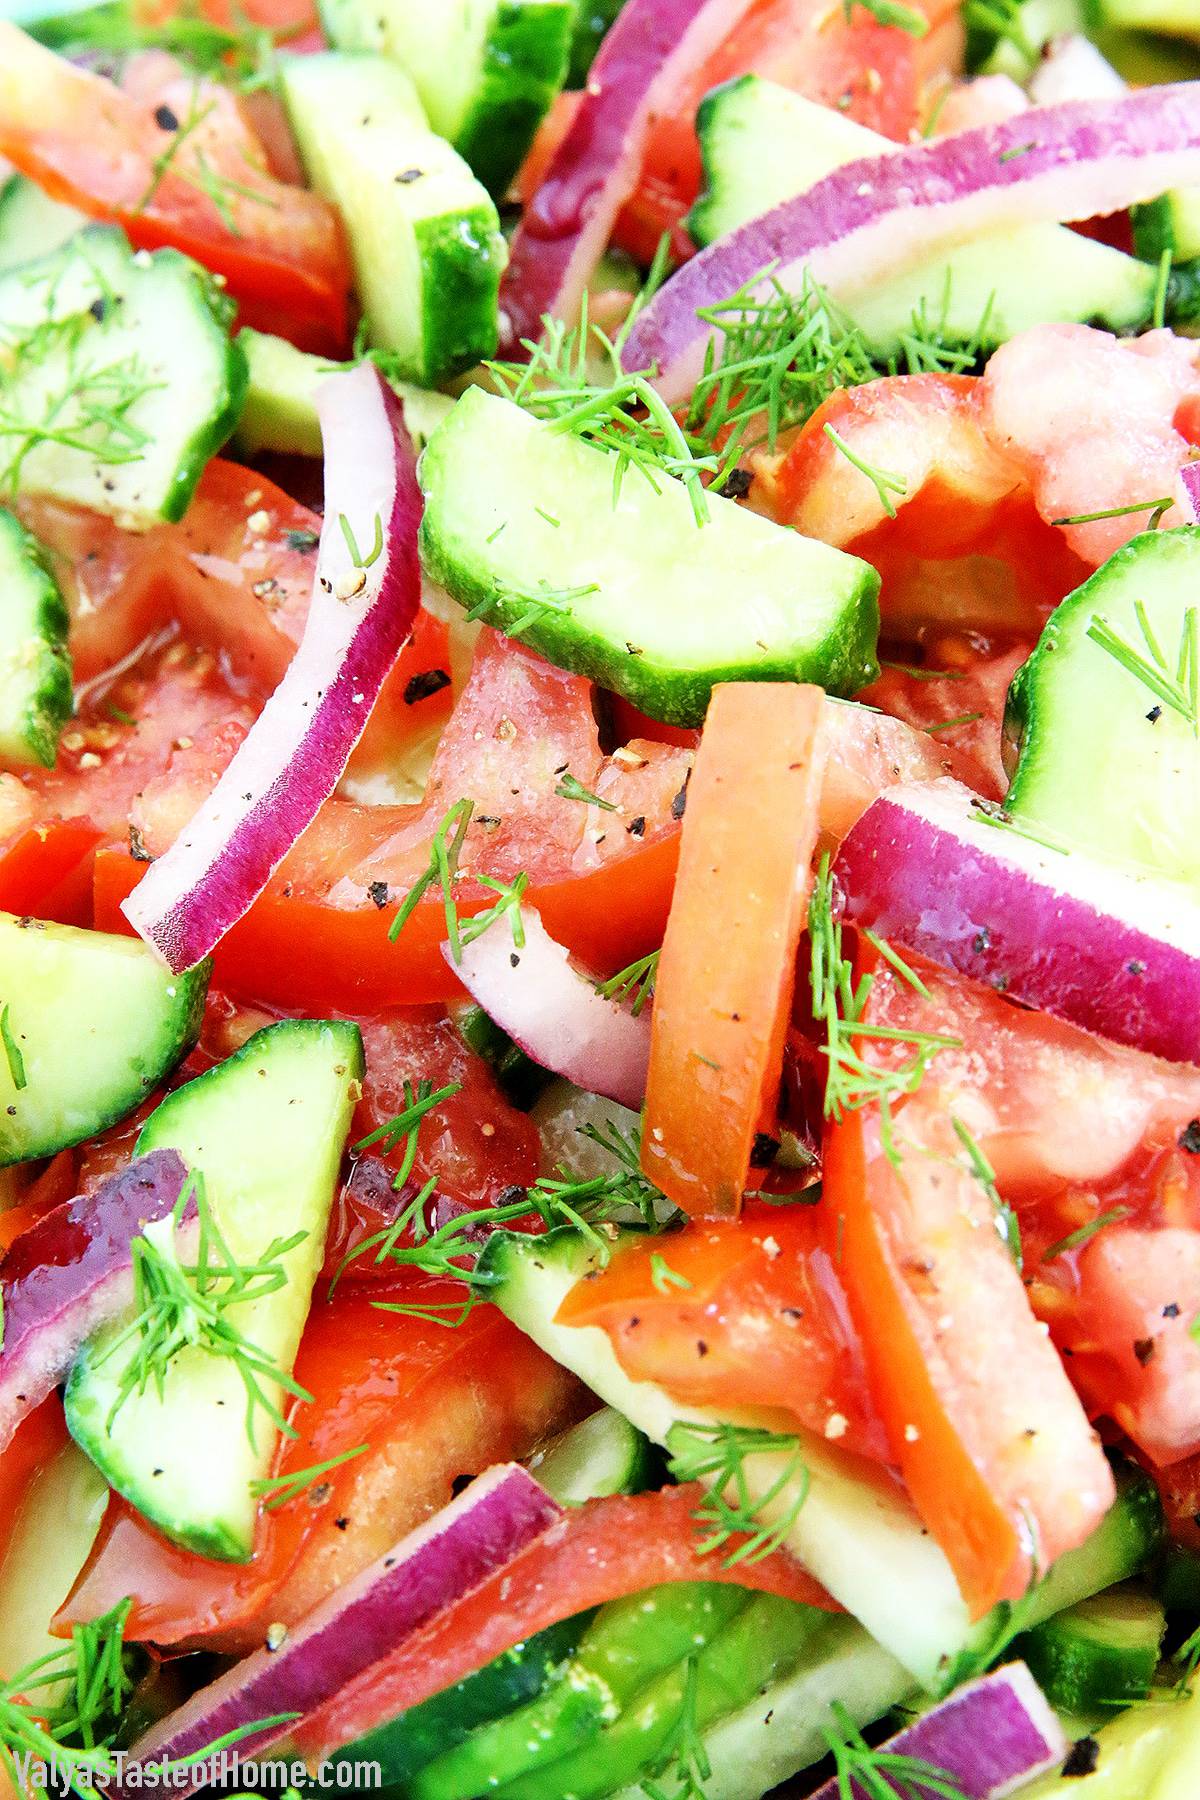 We have this Cucumber Tomato and Onion Salad Recipe most frequently during the summertime not only because these particular veggies grow in abundance but incredibly quick and so simple to produce. #homegrownproduce #freshvegetables #organiclygrown #valyastasteofhome.com